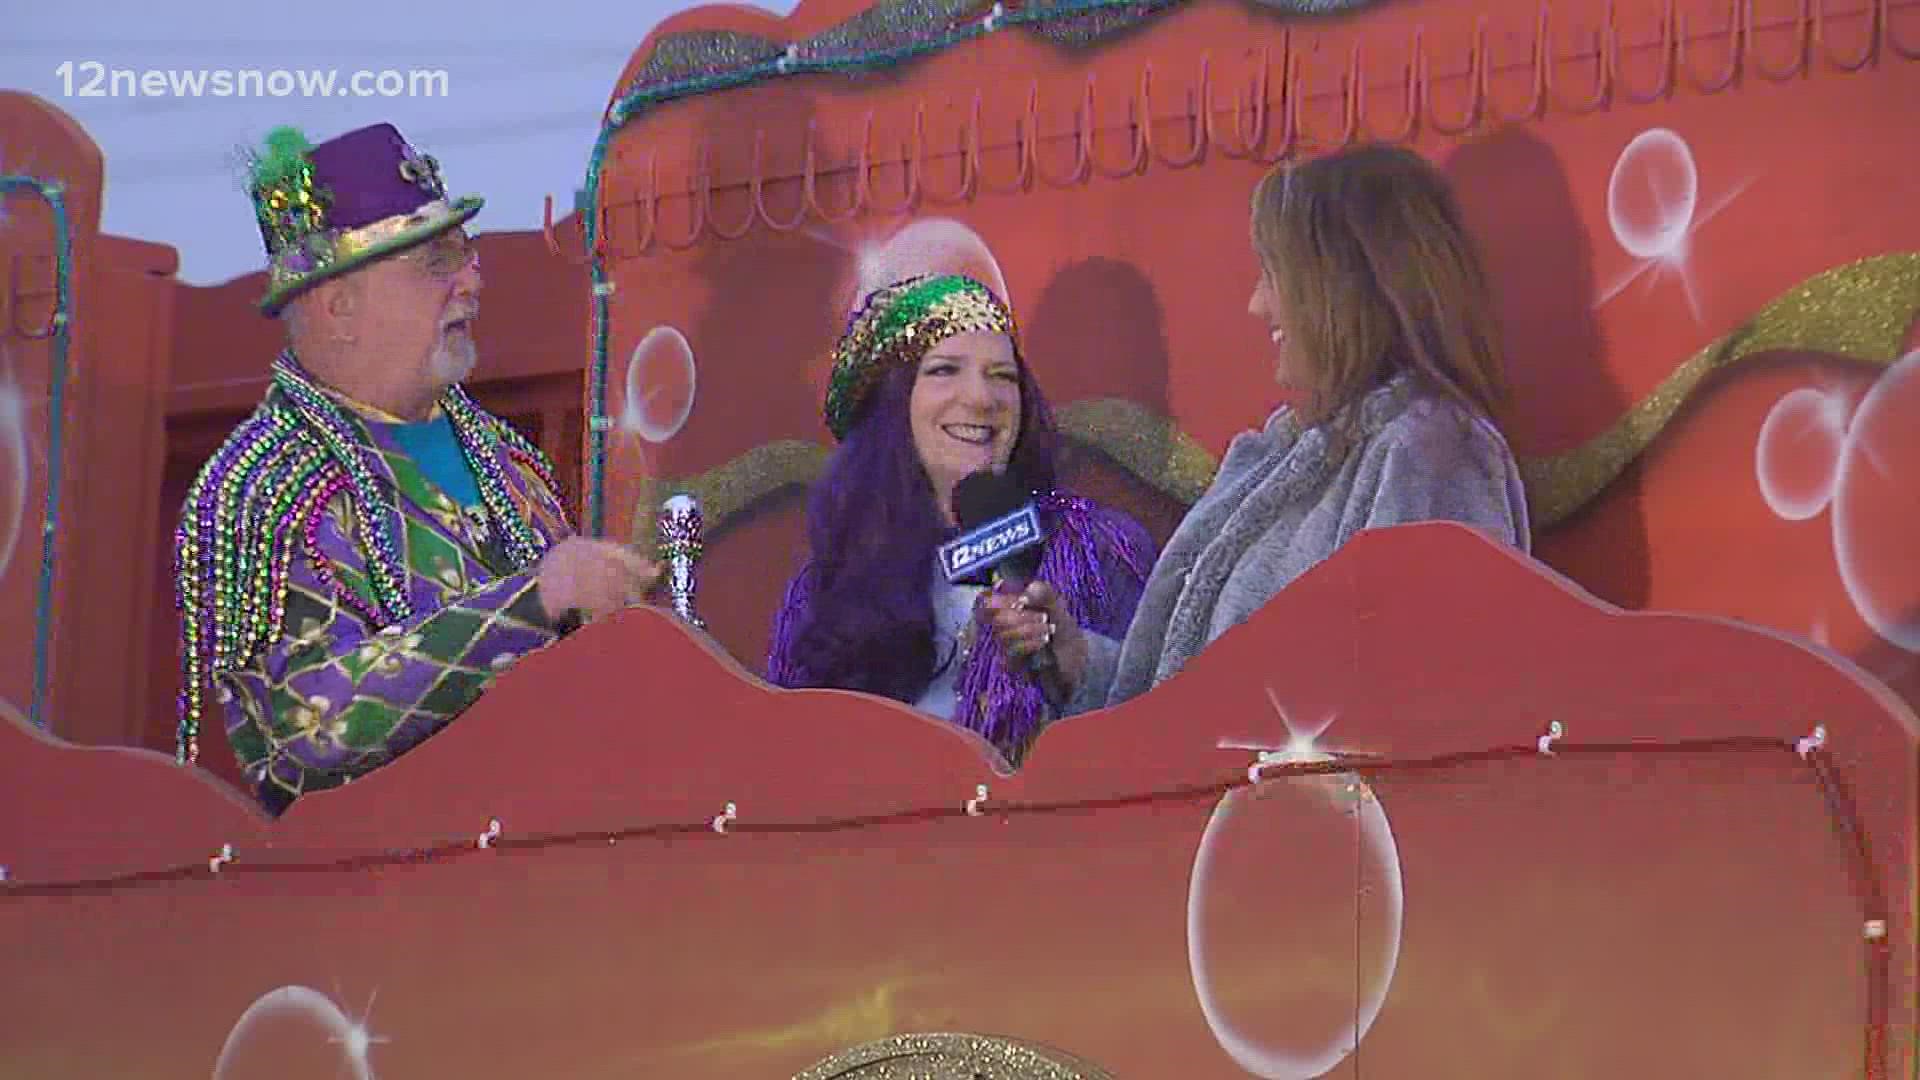 Mardi Gras Southeast Texas is kicking off on Thursday evening in downtown Beaumont and runs through Sunday evening.